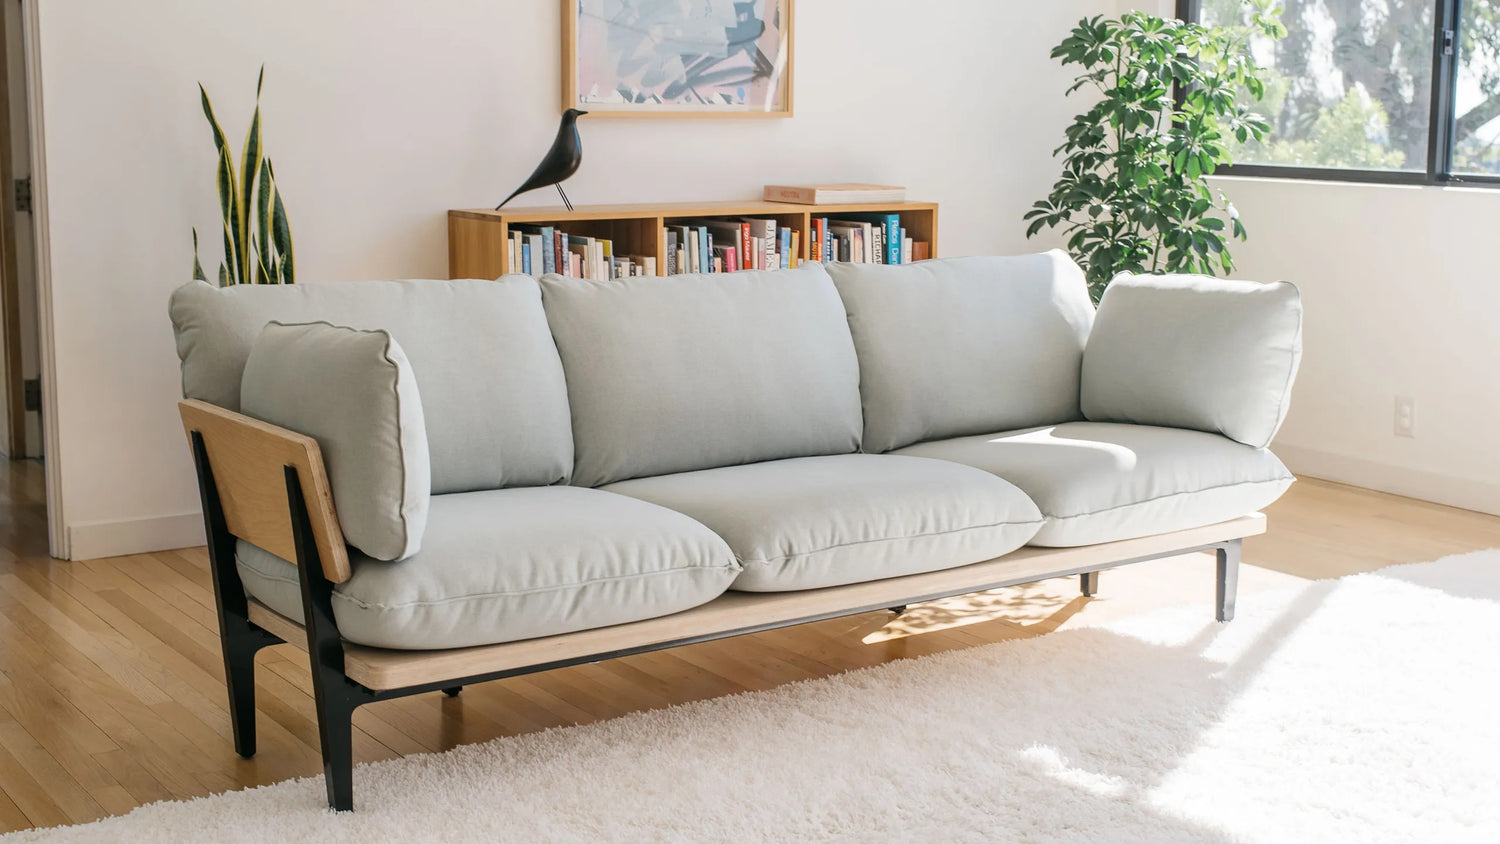 A modern living room features a light blue cushioned sofa with black metal legs on a beige carpet. Behind the sofa, there's a wooden bookshelf filled with books, a plant, and a black bird figurine. Tall green plants and a large window add brightness to the space.